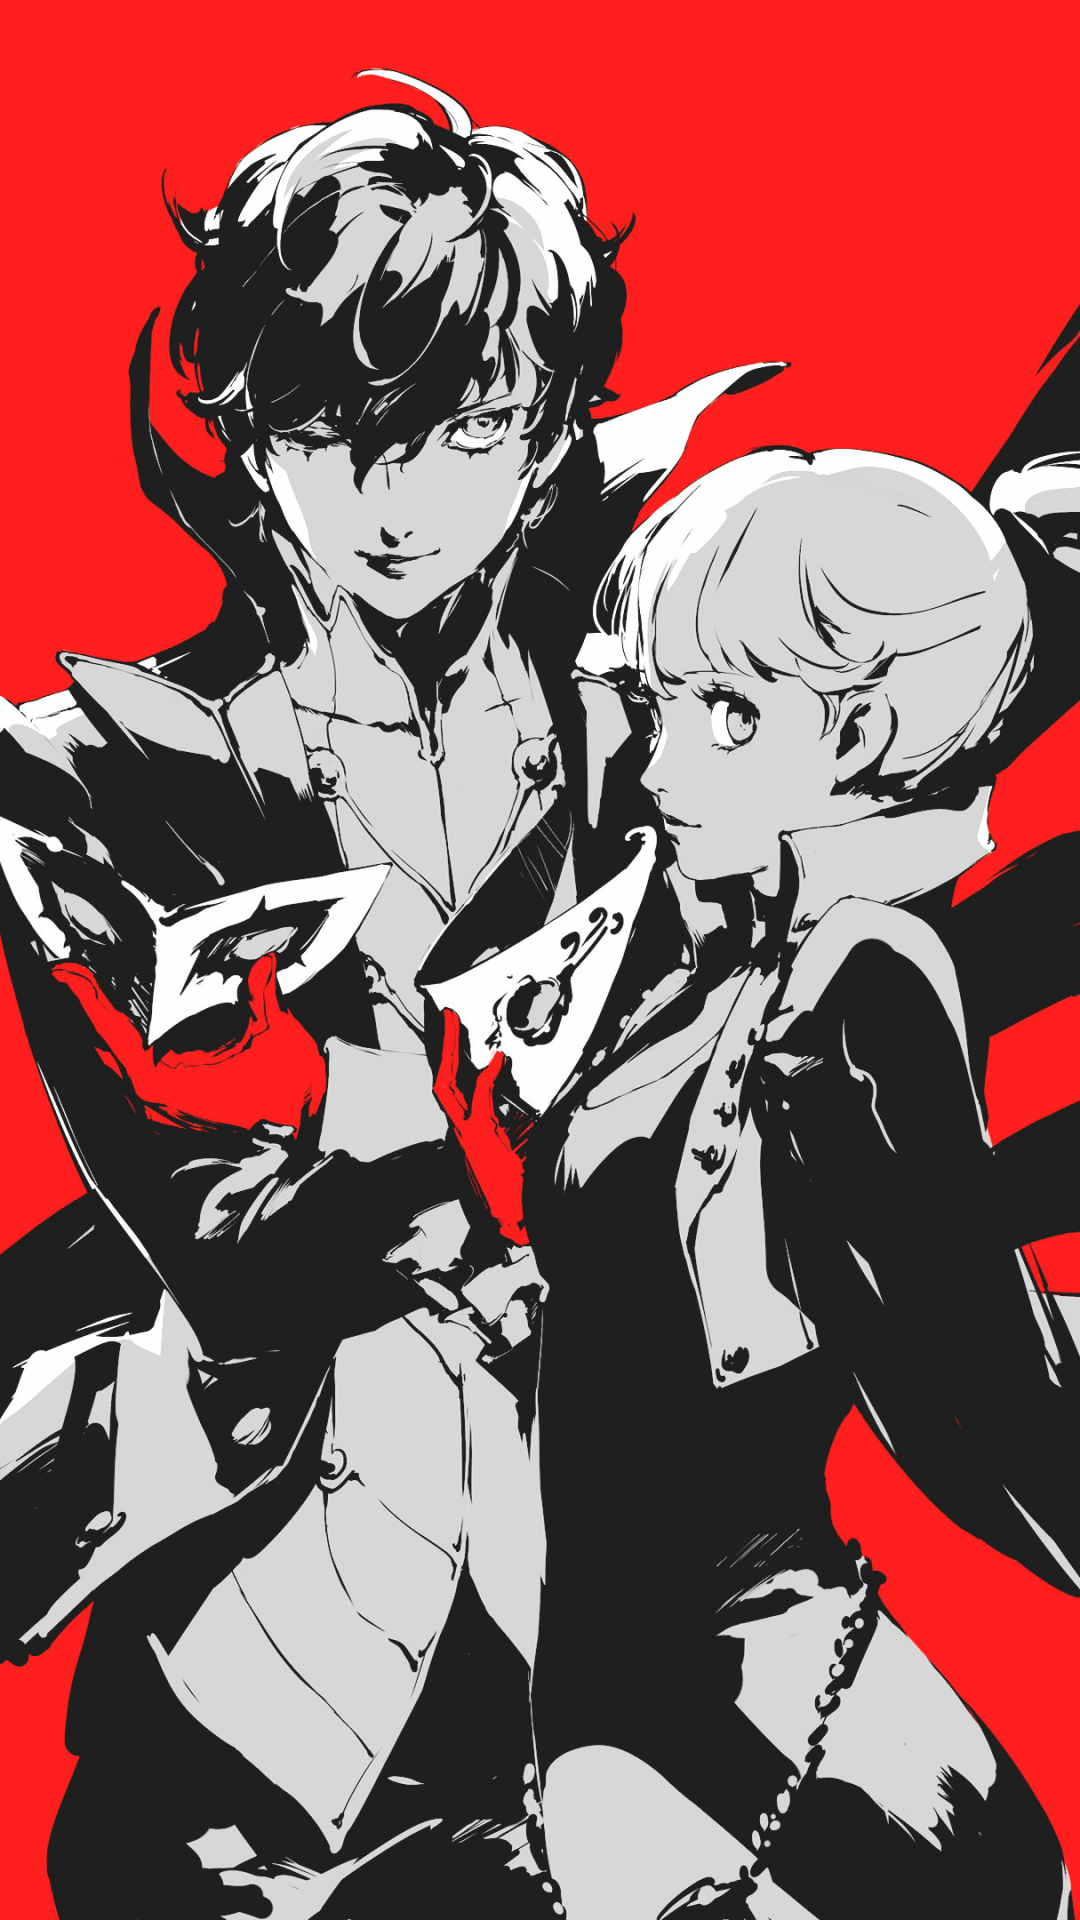 Persona 5 Royal Tips from the Heart New Wallpapers  PlayStationBlog